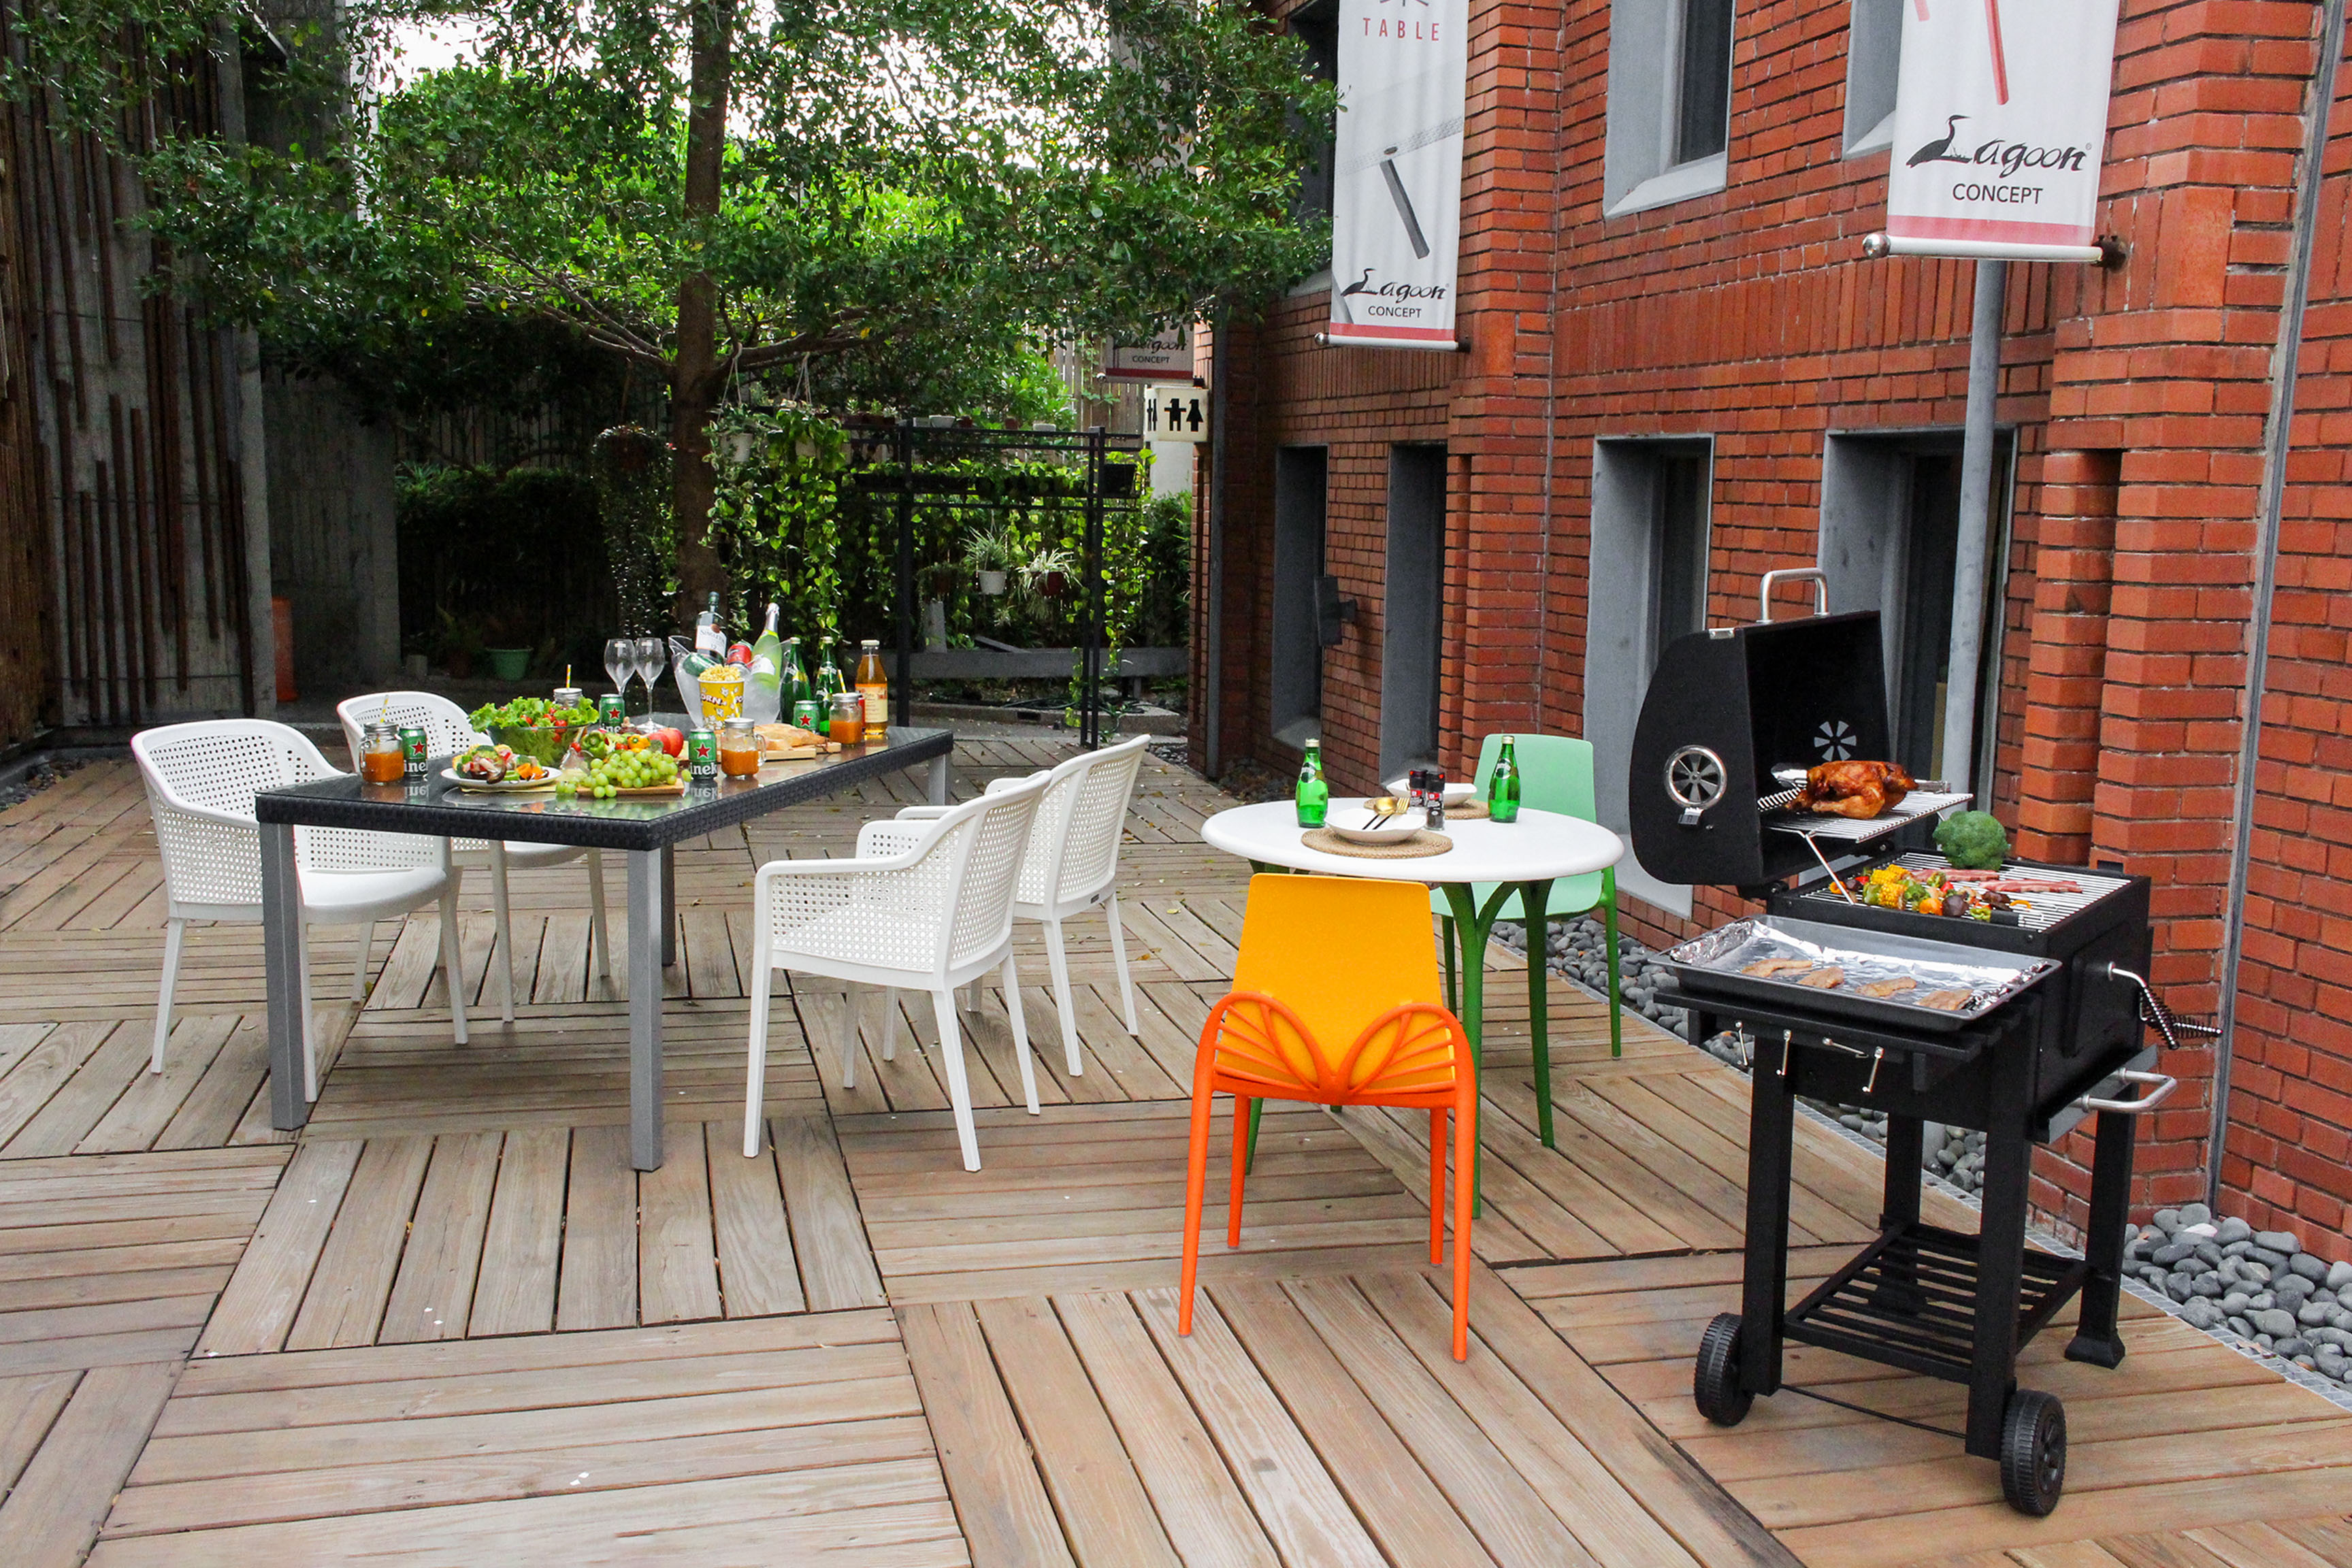 Cook, eat, laugh with friends in the backyard.